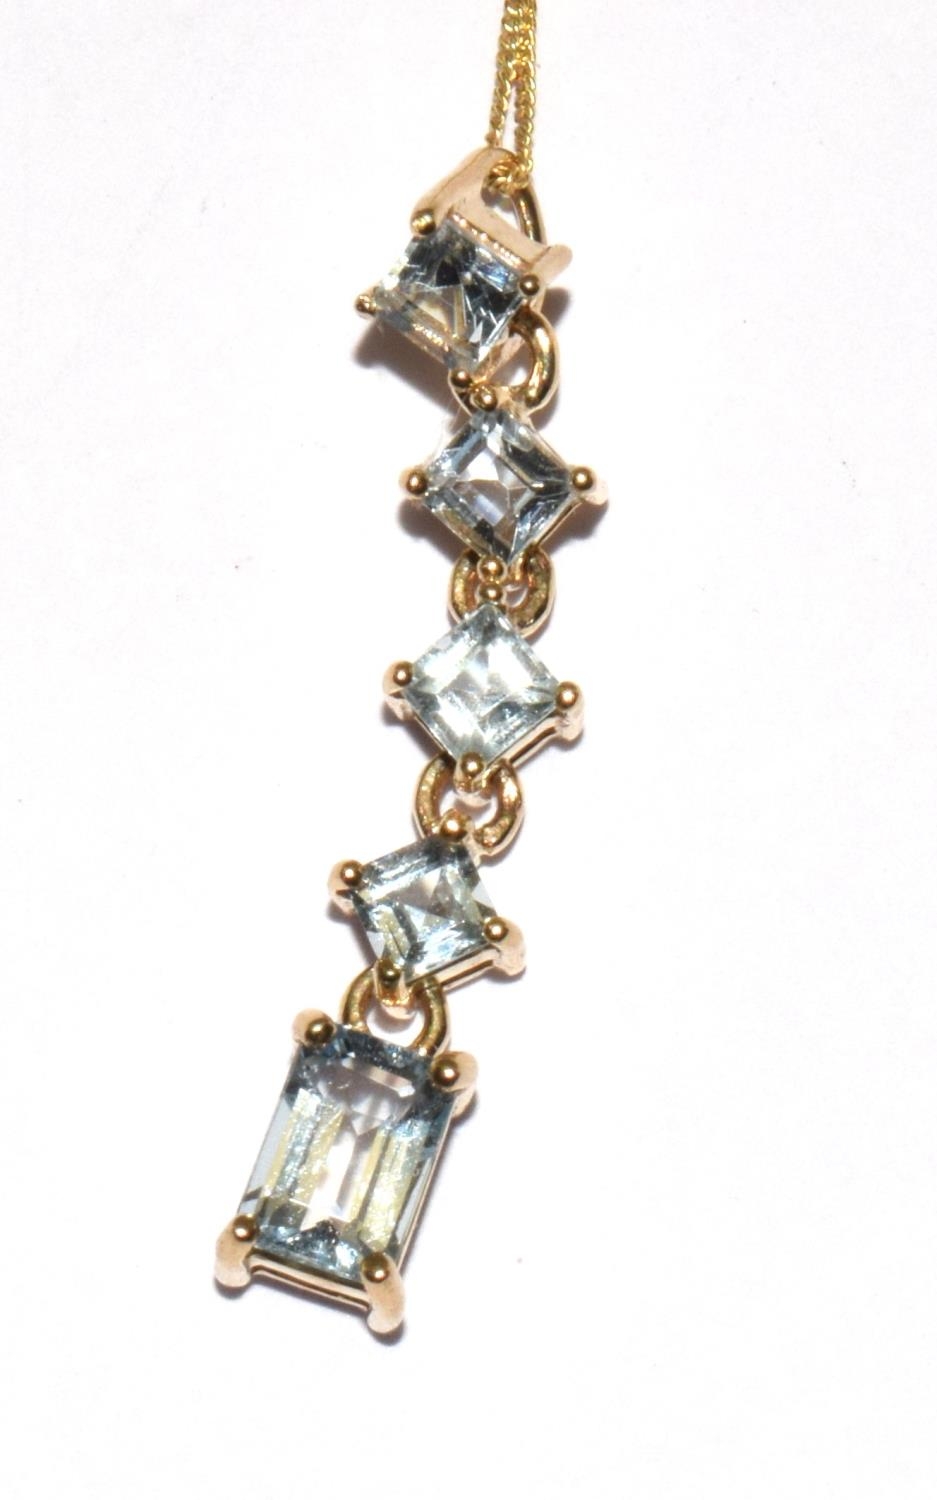 9ct gold 5 stone drop Aquamarine pendant necklace with chain 40cm - Image 7 of 7